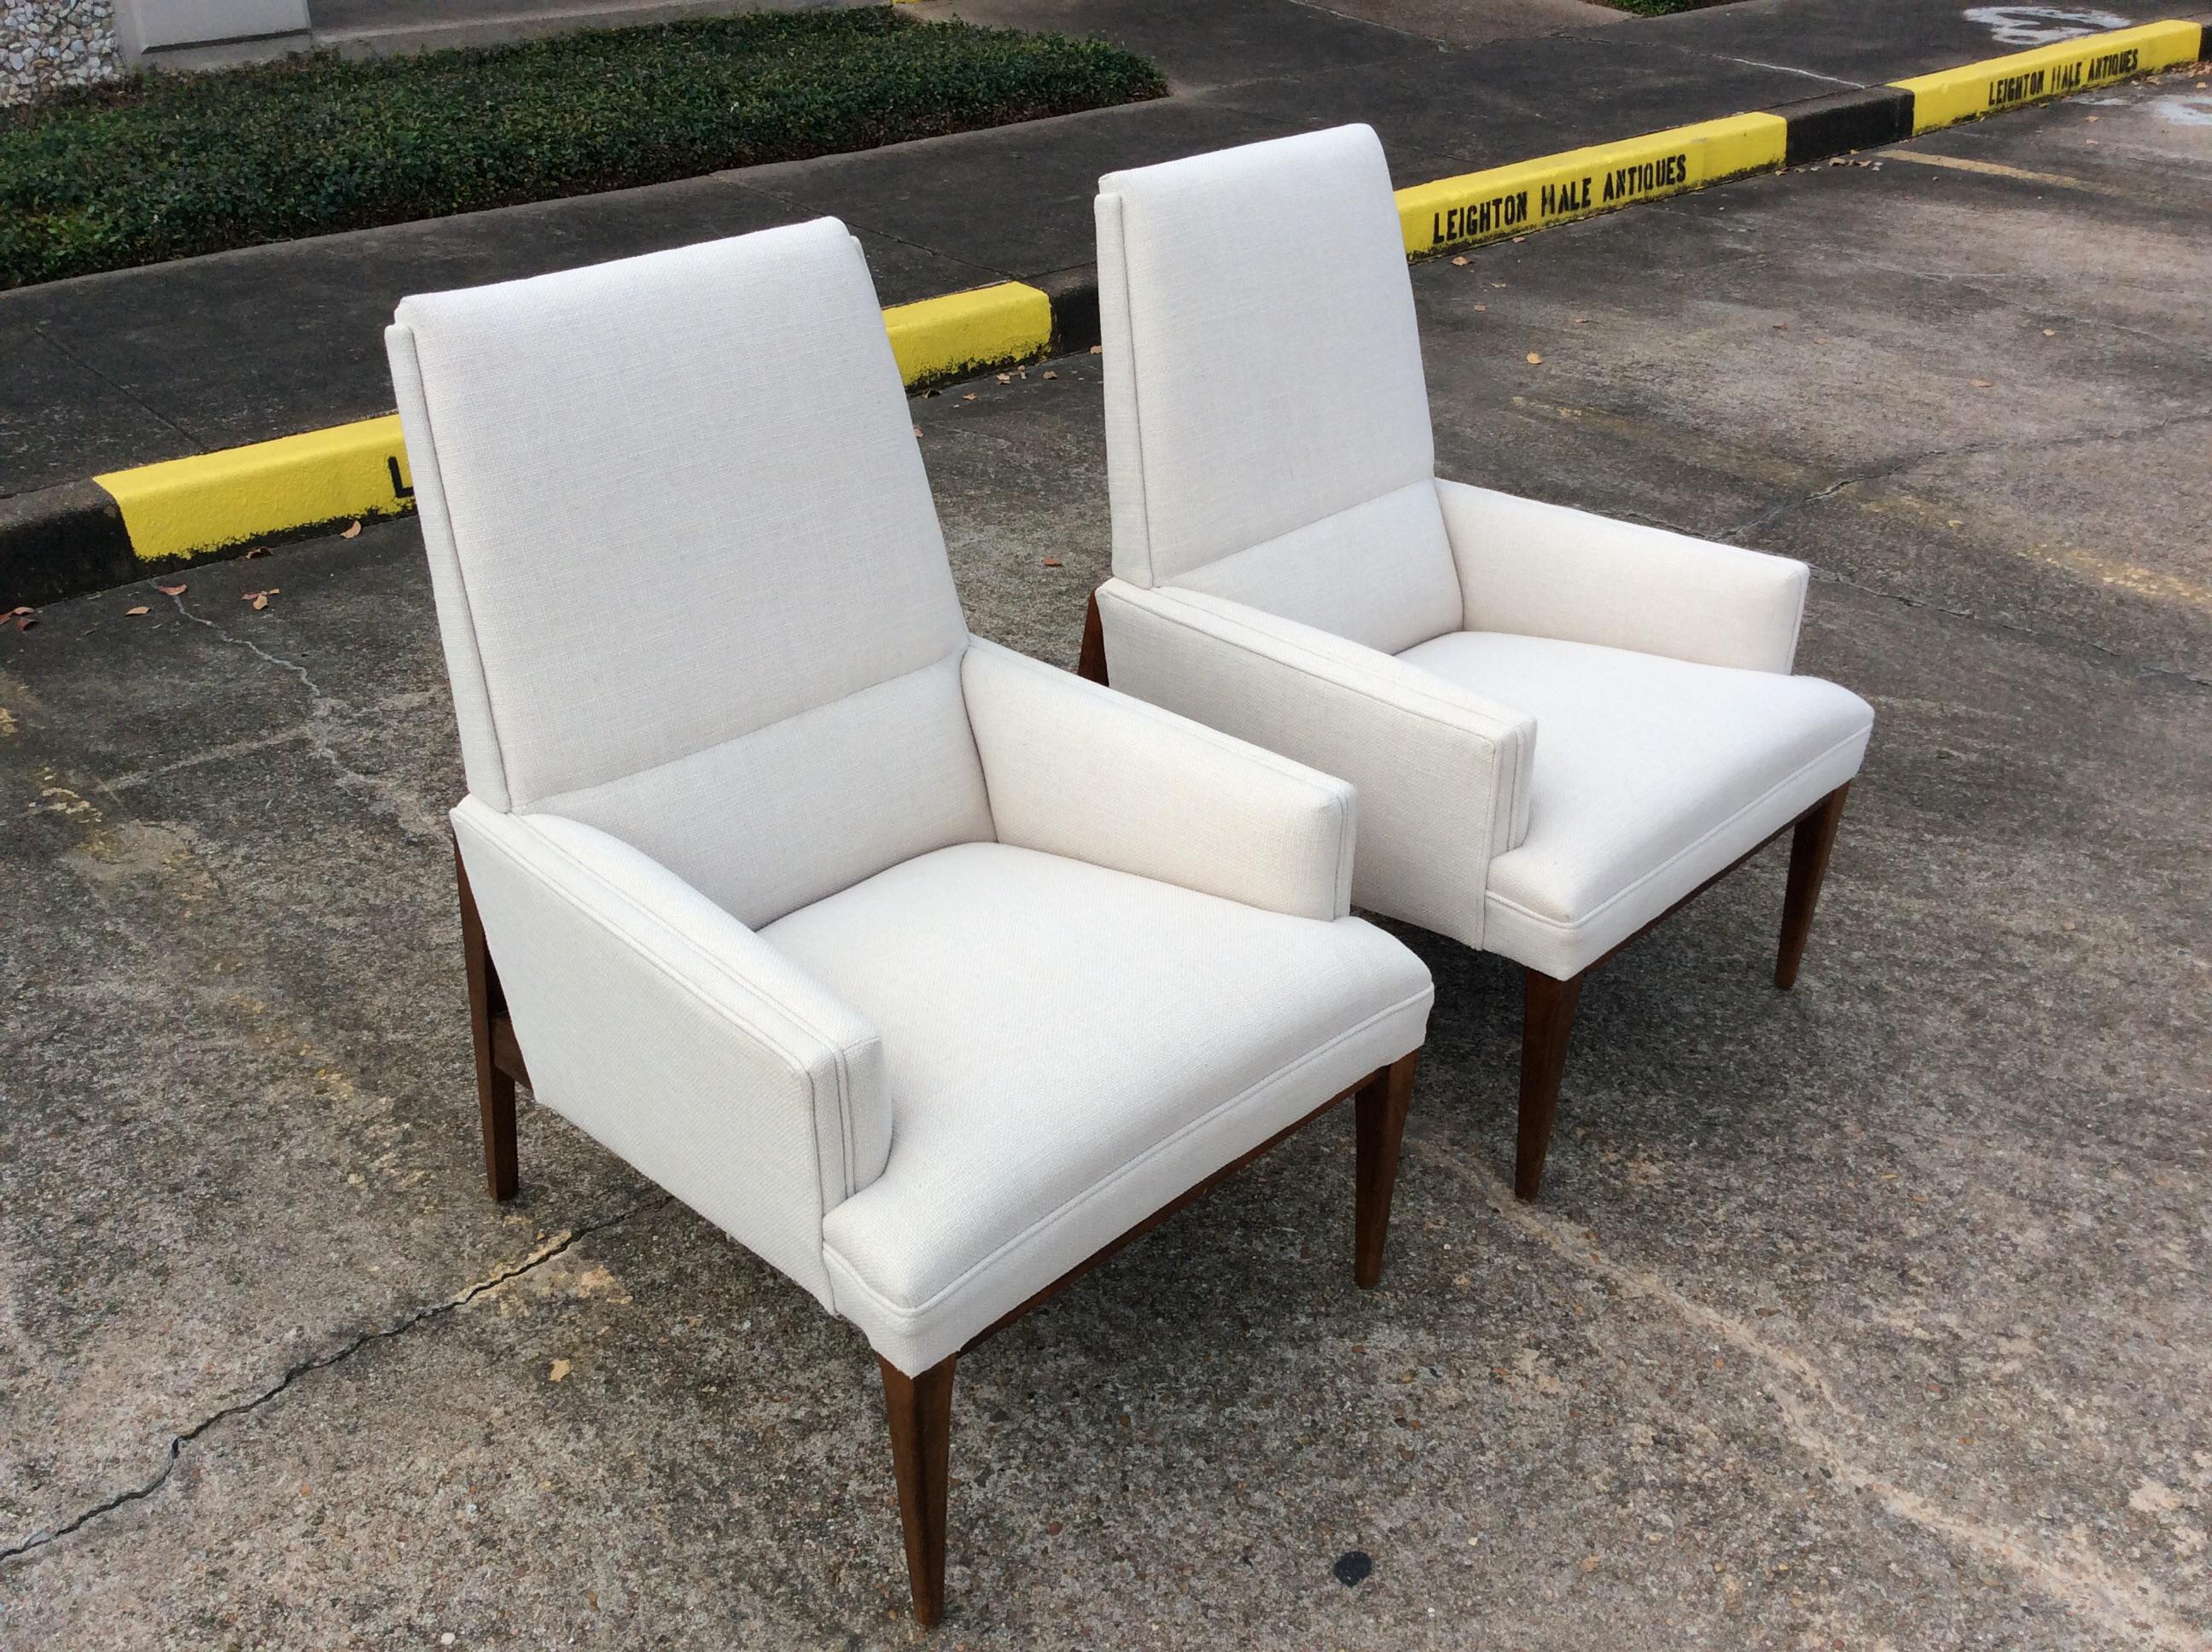 We love the sleek and sculptural form of these Mid-Century Modern lounge chairs. Newly restored and upholstered in a linen blend fabric and standing on wood angular legs, these chairs will withstand the test of time.

25